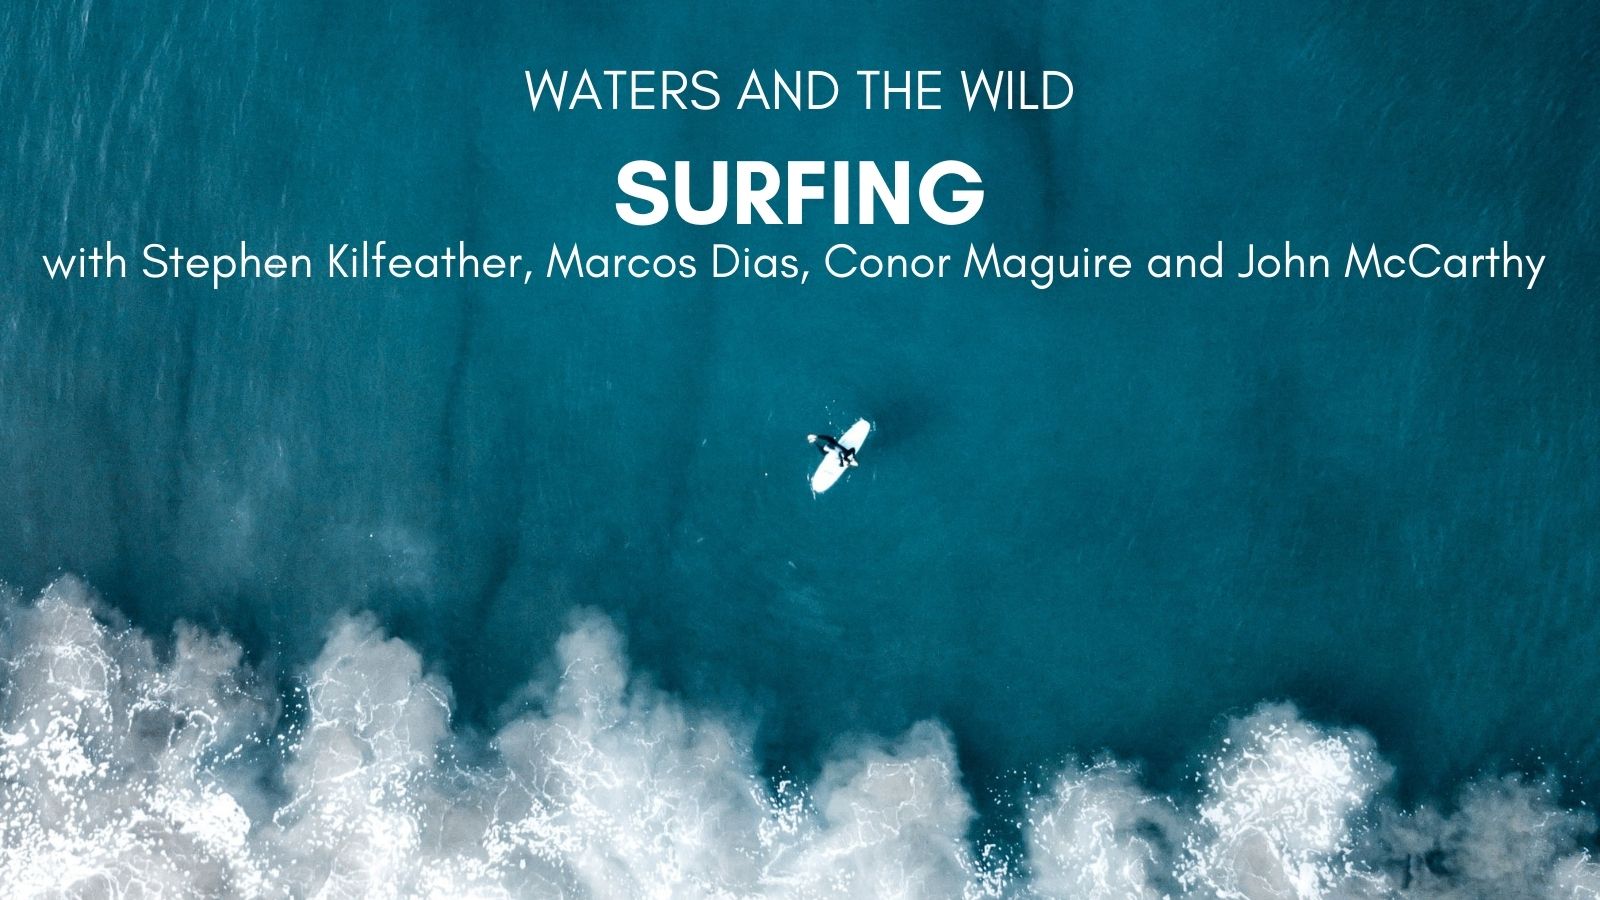 Waters and the Wild Webinar. Surfing with with Stephen Kilfeather, Marcos Dias, Conor Maguire and John McCarthy